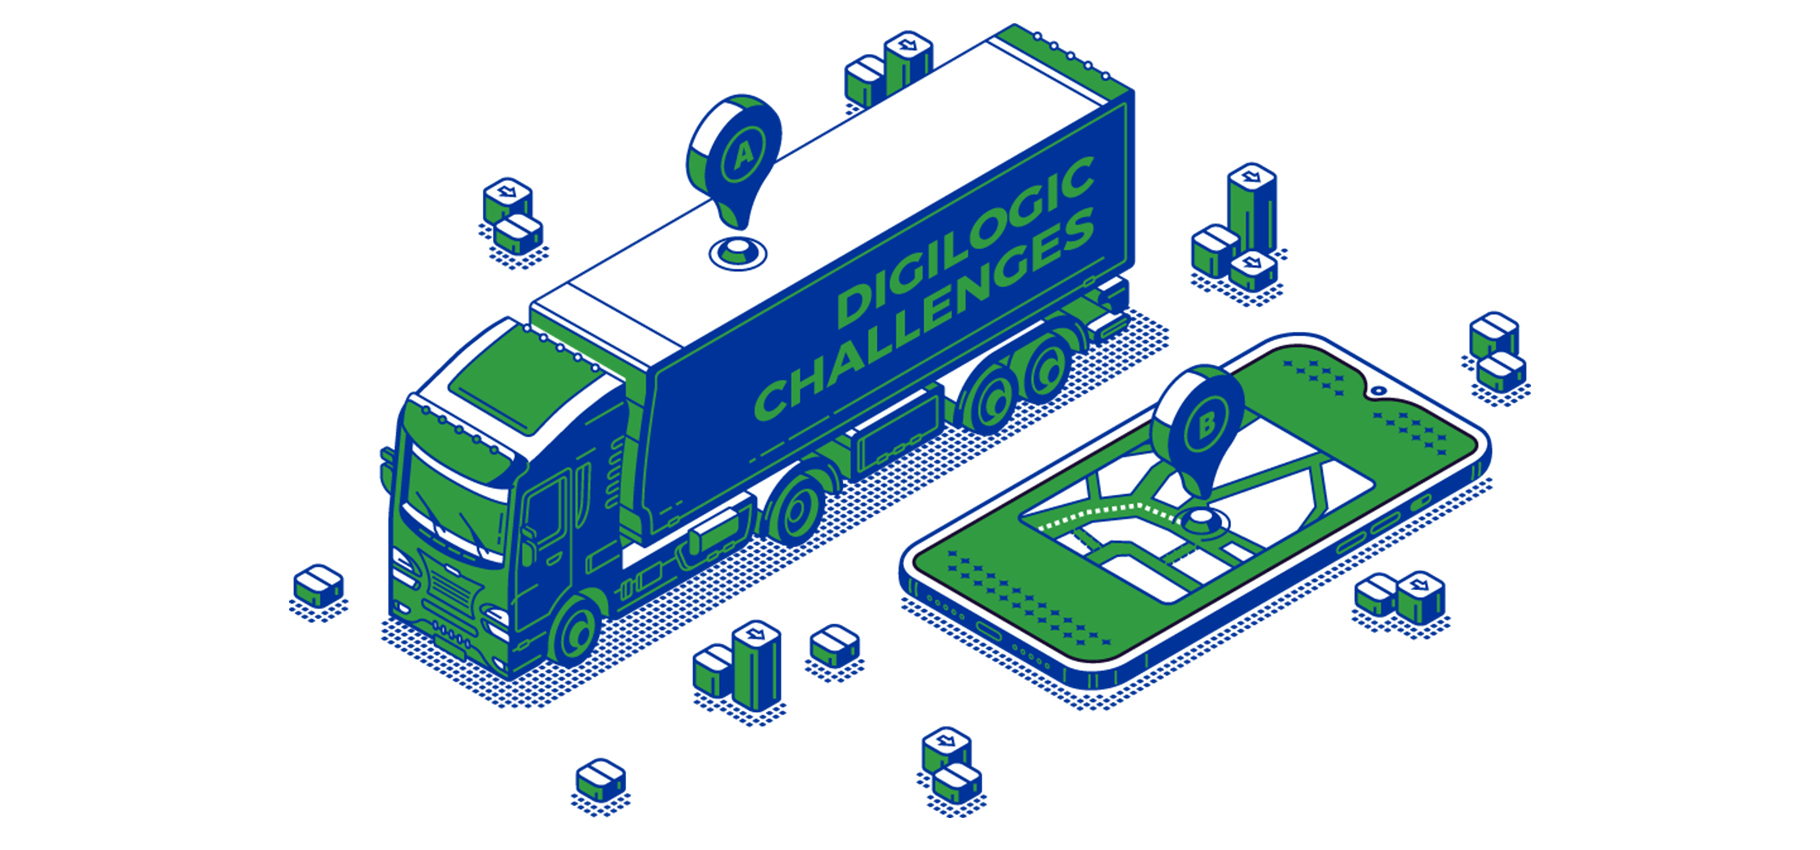 Call for proposals to address Smart Logistics Challenges